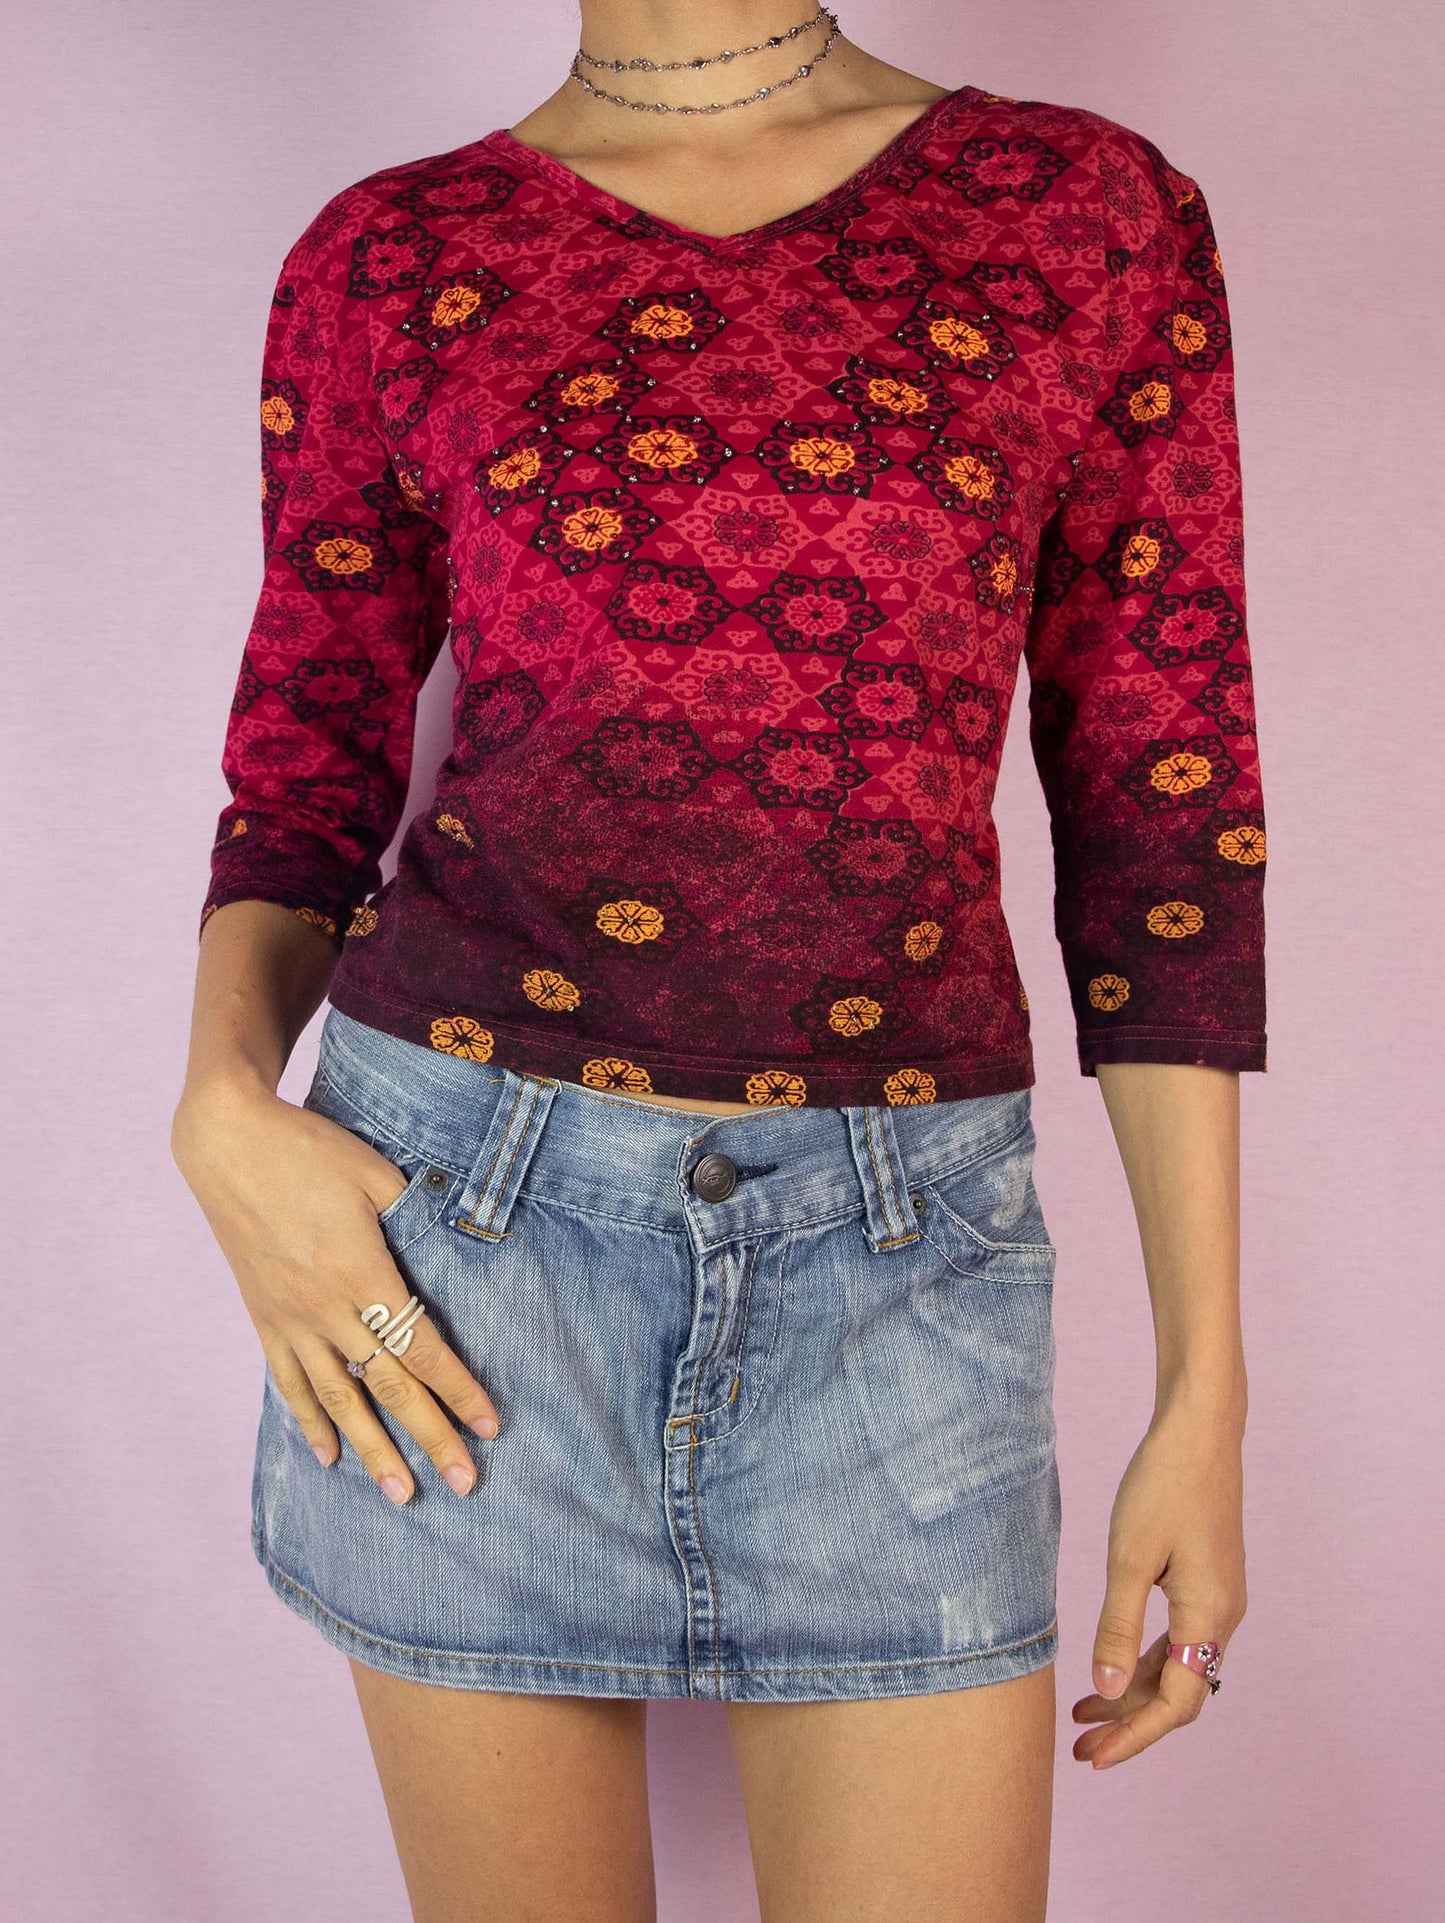 The Y2K Red Abstract Print Top is a vintage 2000s burgundy boho half-sleeve shirt with a graphic pattern and embellished with beads.